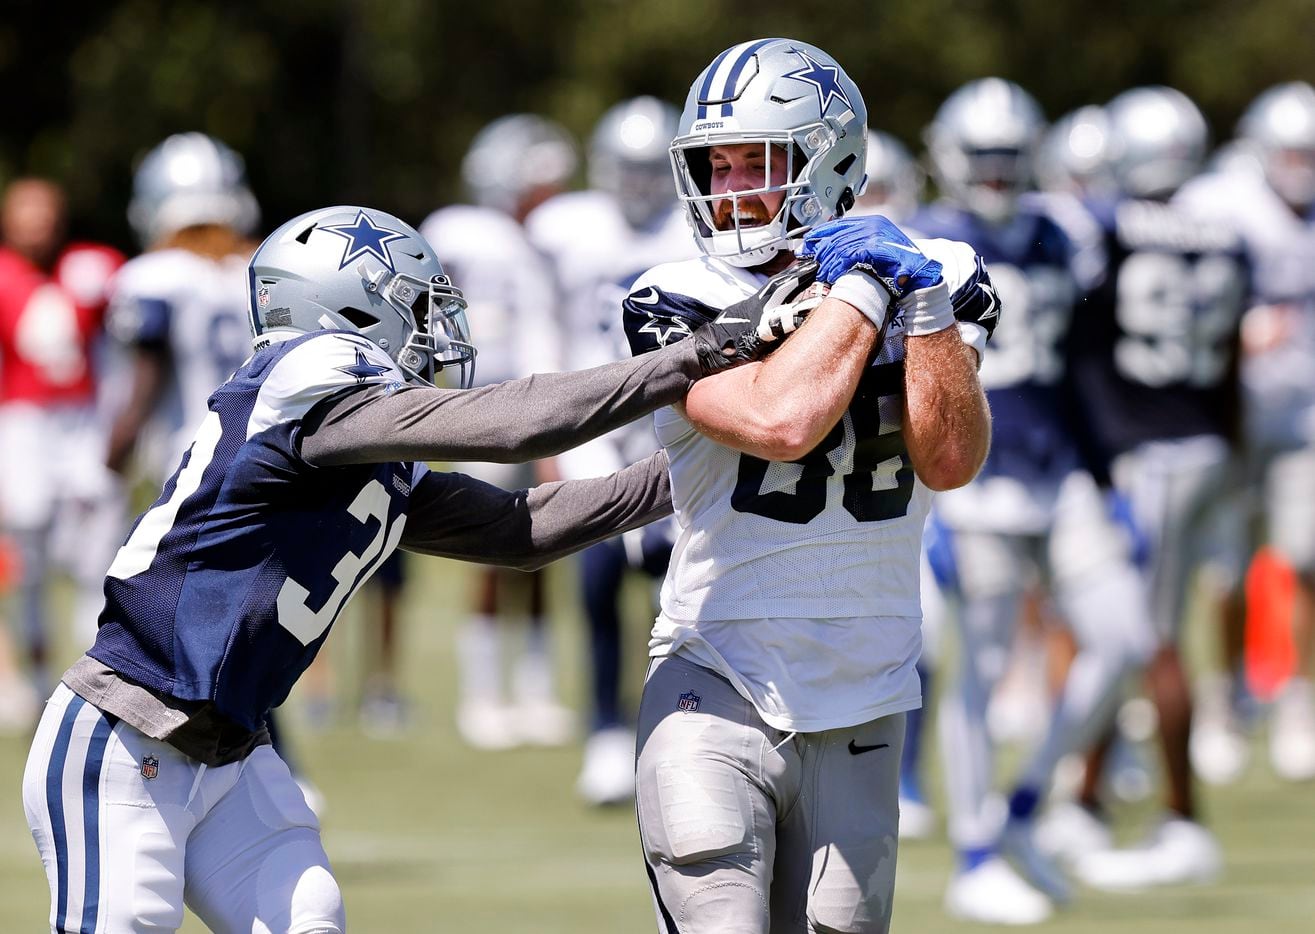 Dallas Cowboys tight end Dalton Schultz (86) fights off cornerback Anthony Brown (30) after making a long pass completion during Training Camp practice at The Star in Frisco, Texas, Tuesday, August 24, 2021.(Tom Fox/The Dallas Morning News)